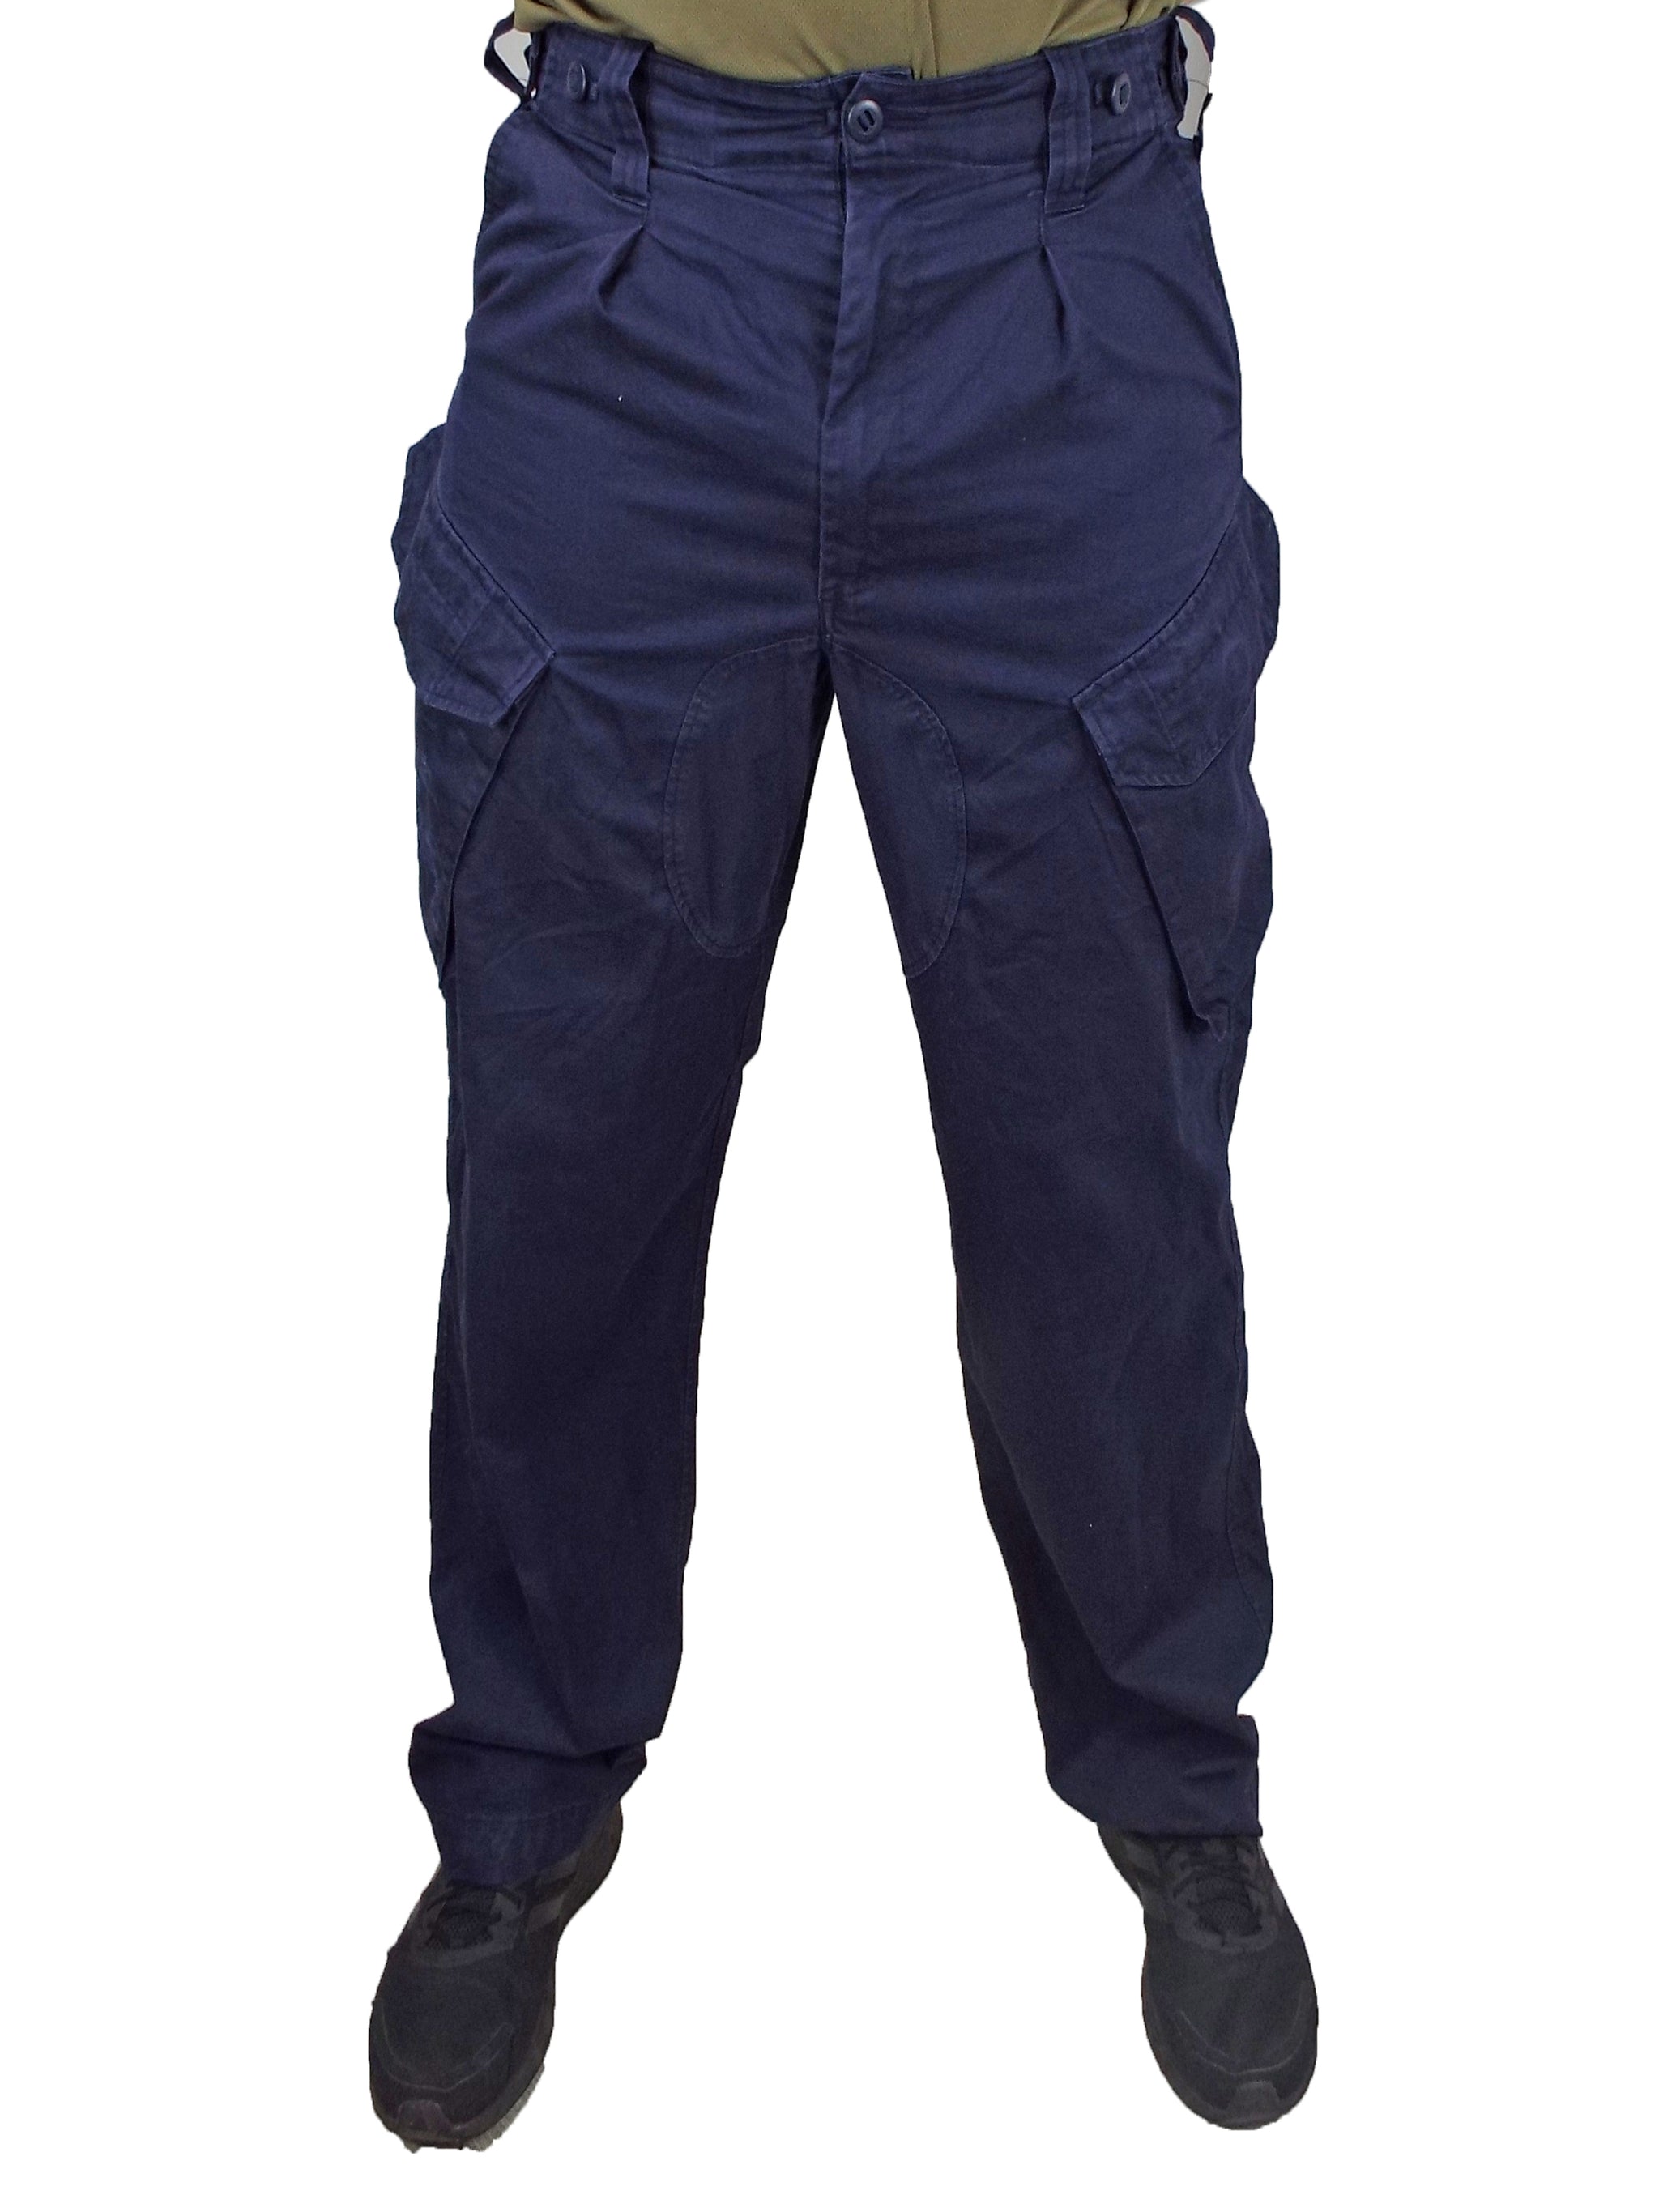 Shop the Attico Cargo Pants Everyones Wearing During Fashion Month